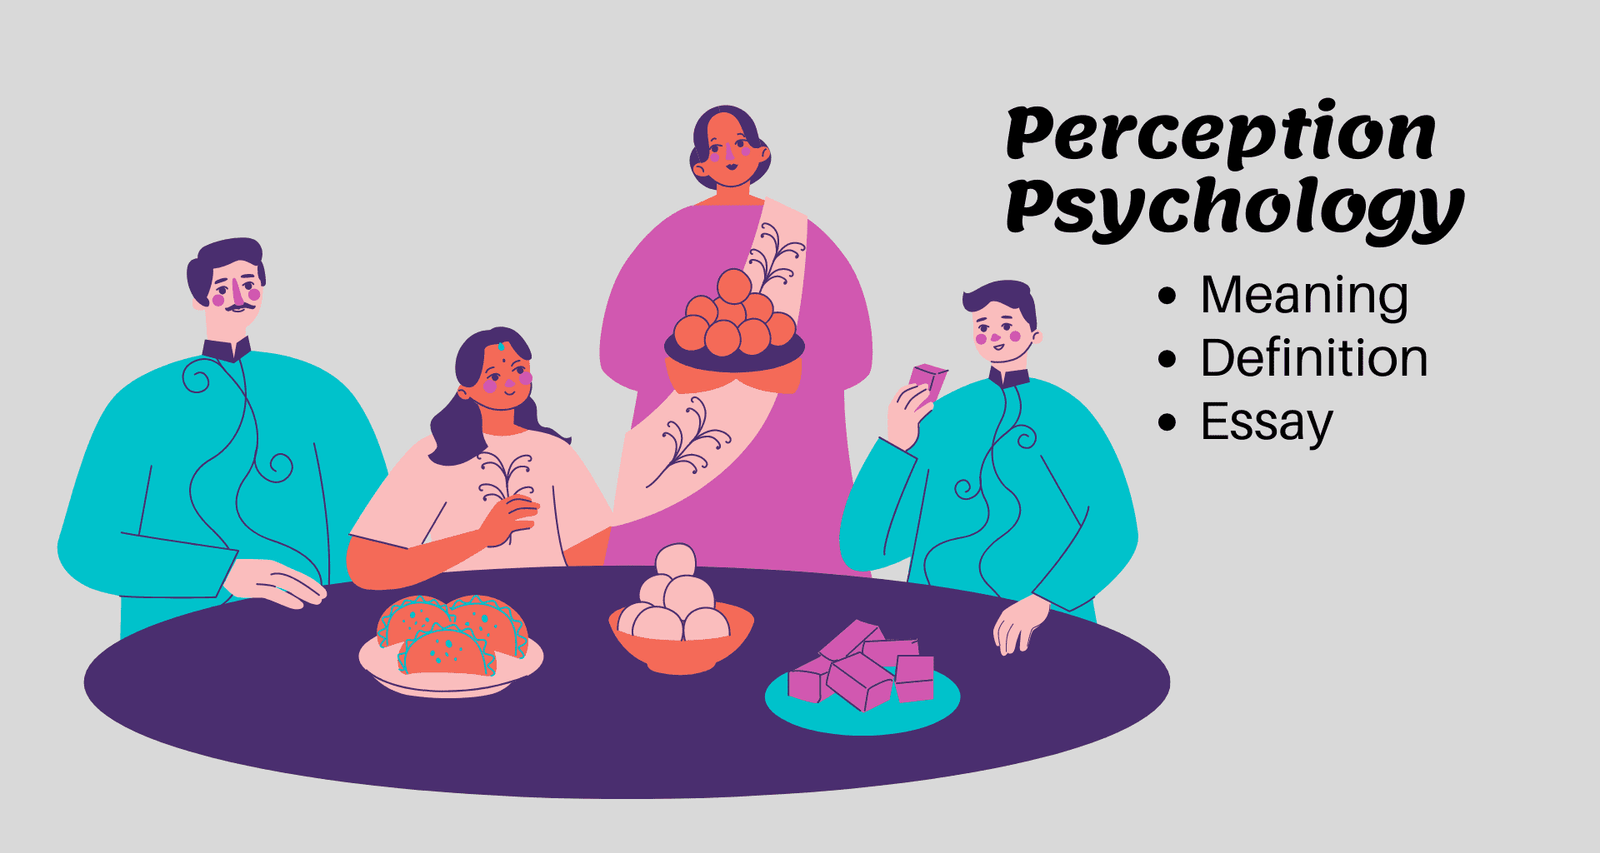 Perception in Psychology Meaning Definition and Essay Image